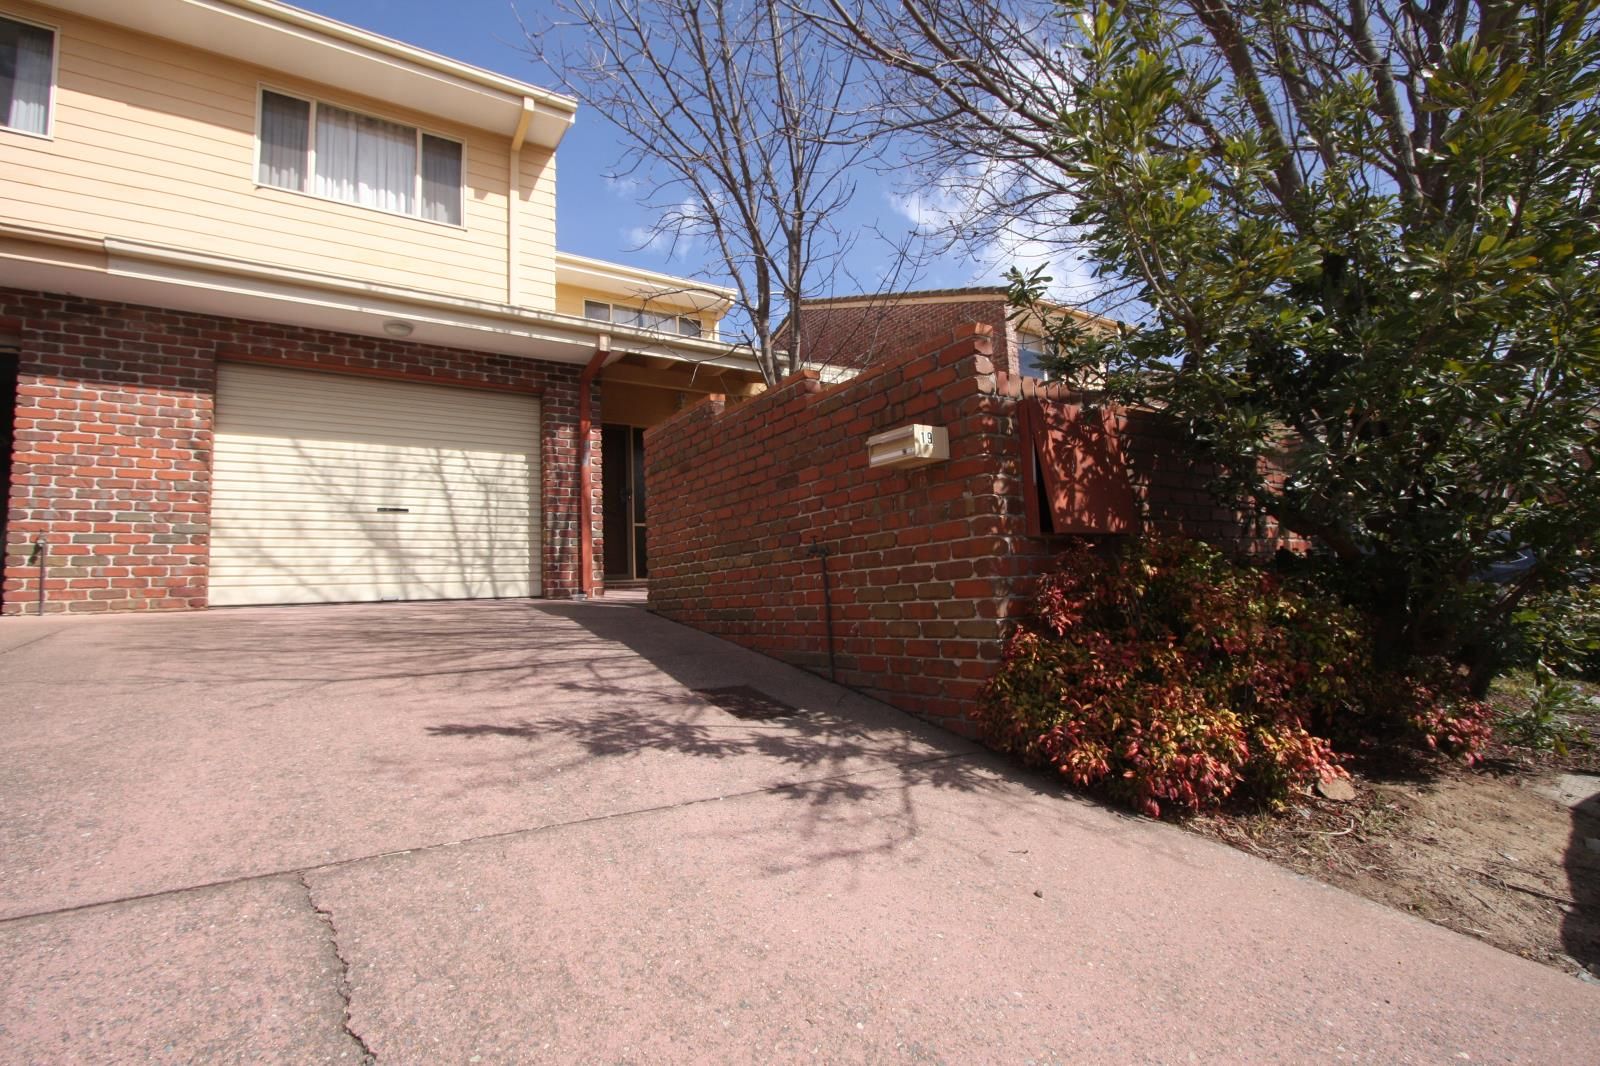 19 Terry Close, Swinger Hill ACT 2606, Image 0